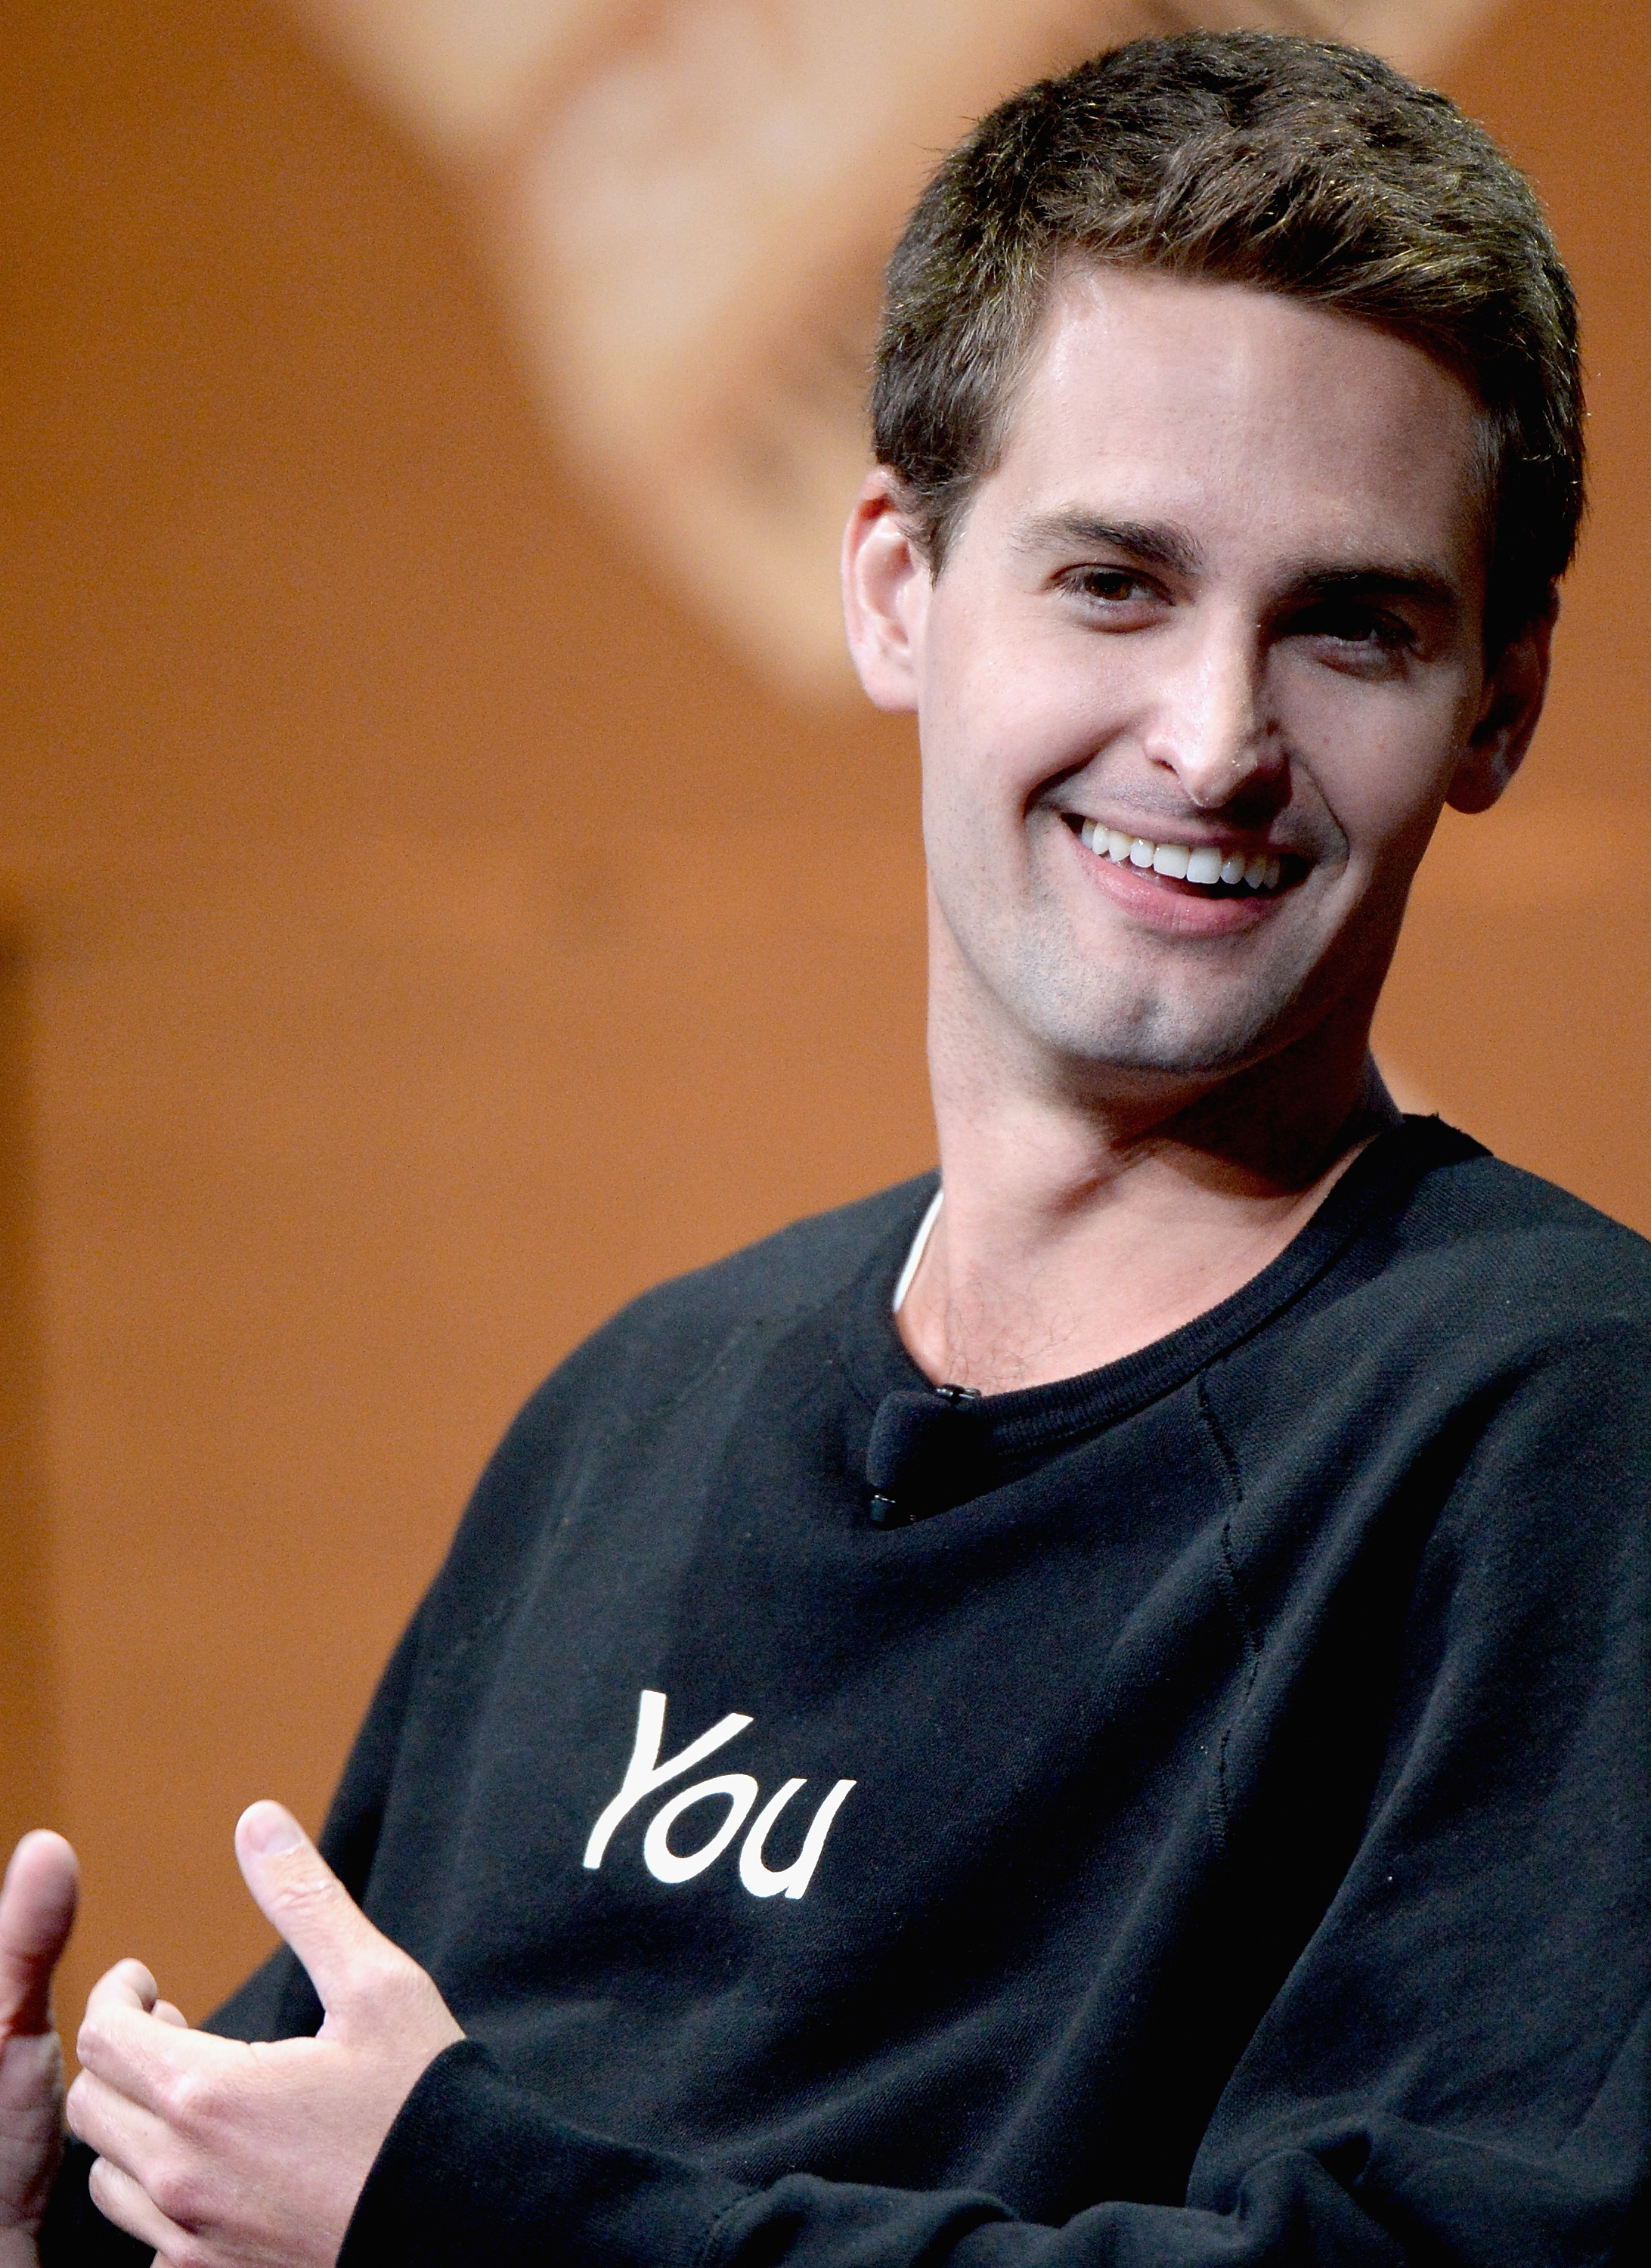 Snapchat CEO Evan Spiegel speaks onstage during "Disrupting Information and Communication" at the Vanity Fair New Establishment Summit on Oct. 8, 2014 in San Francisco. (Michael Kovac&mdash;Getty Images)